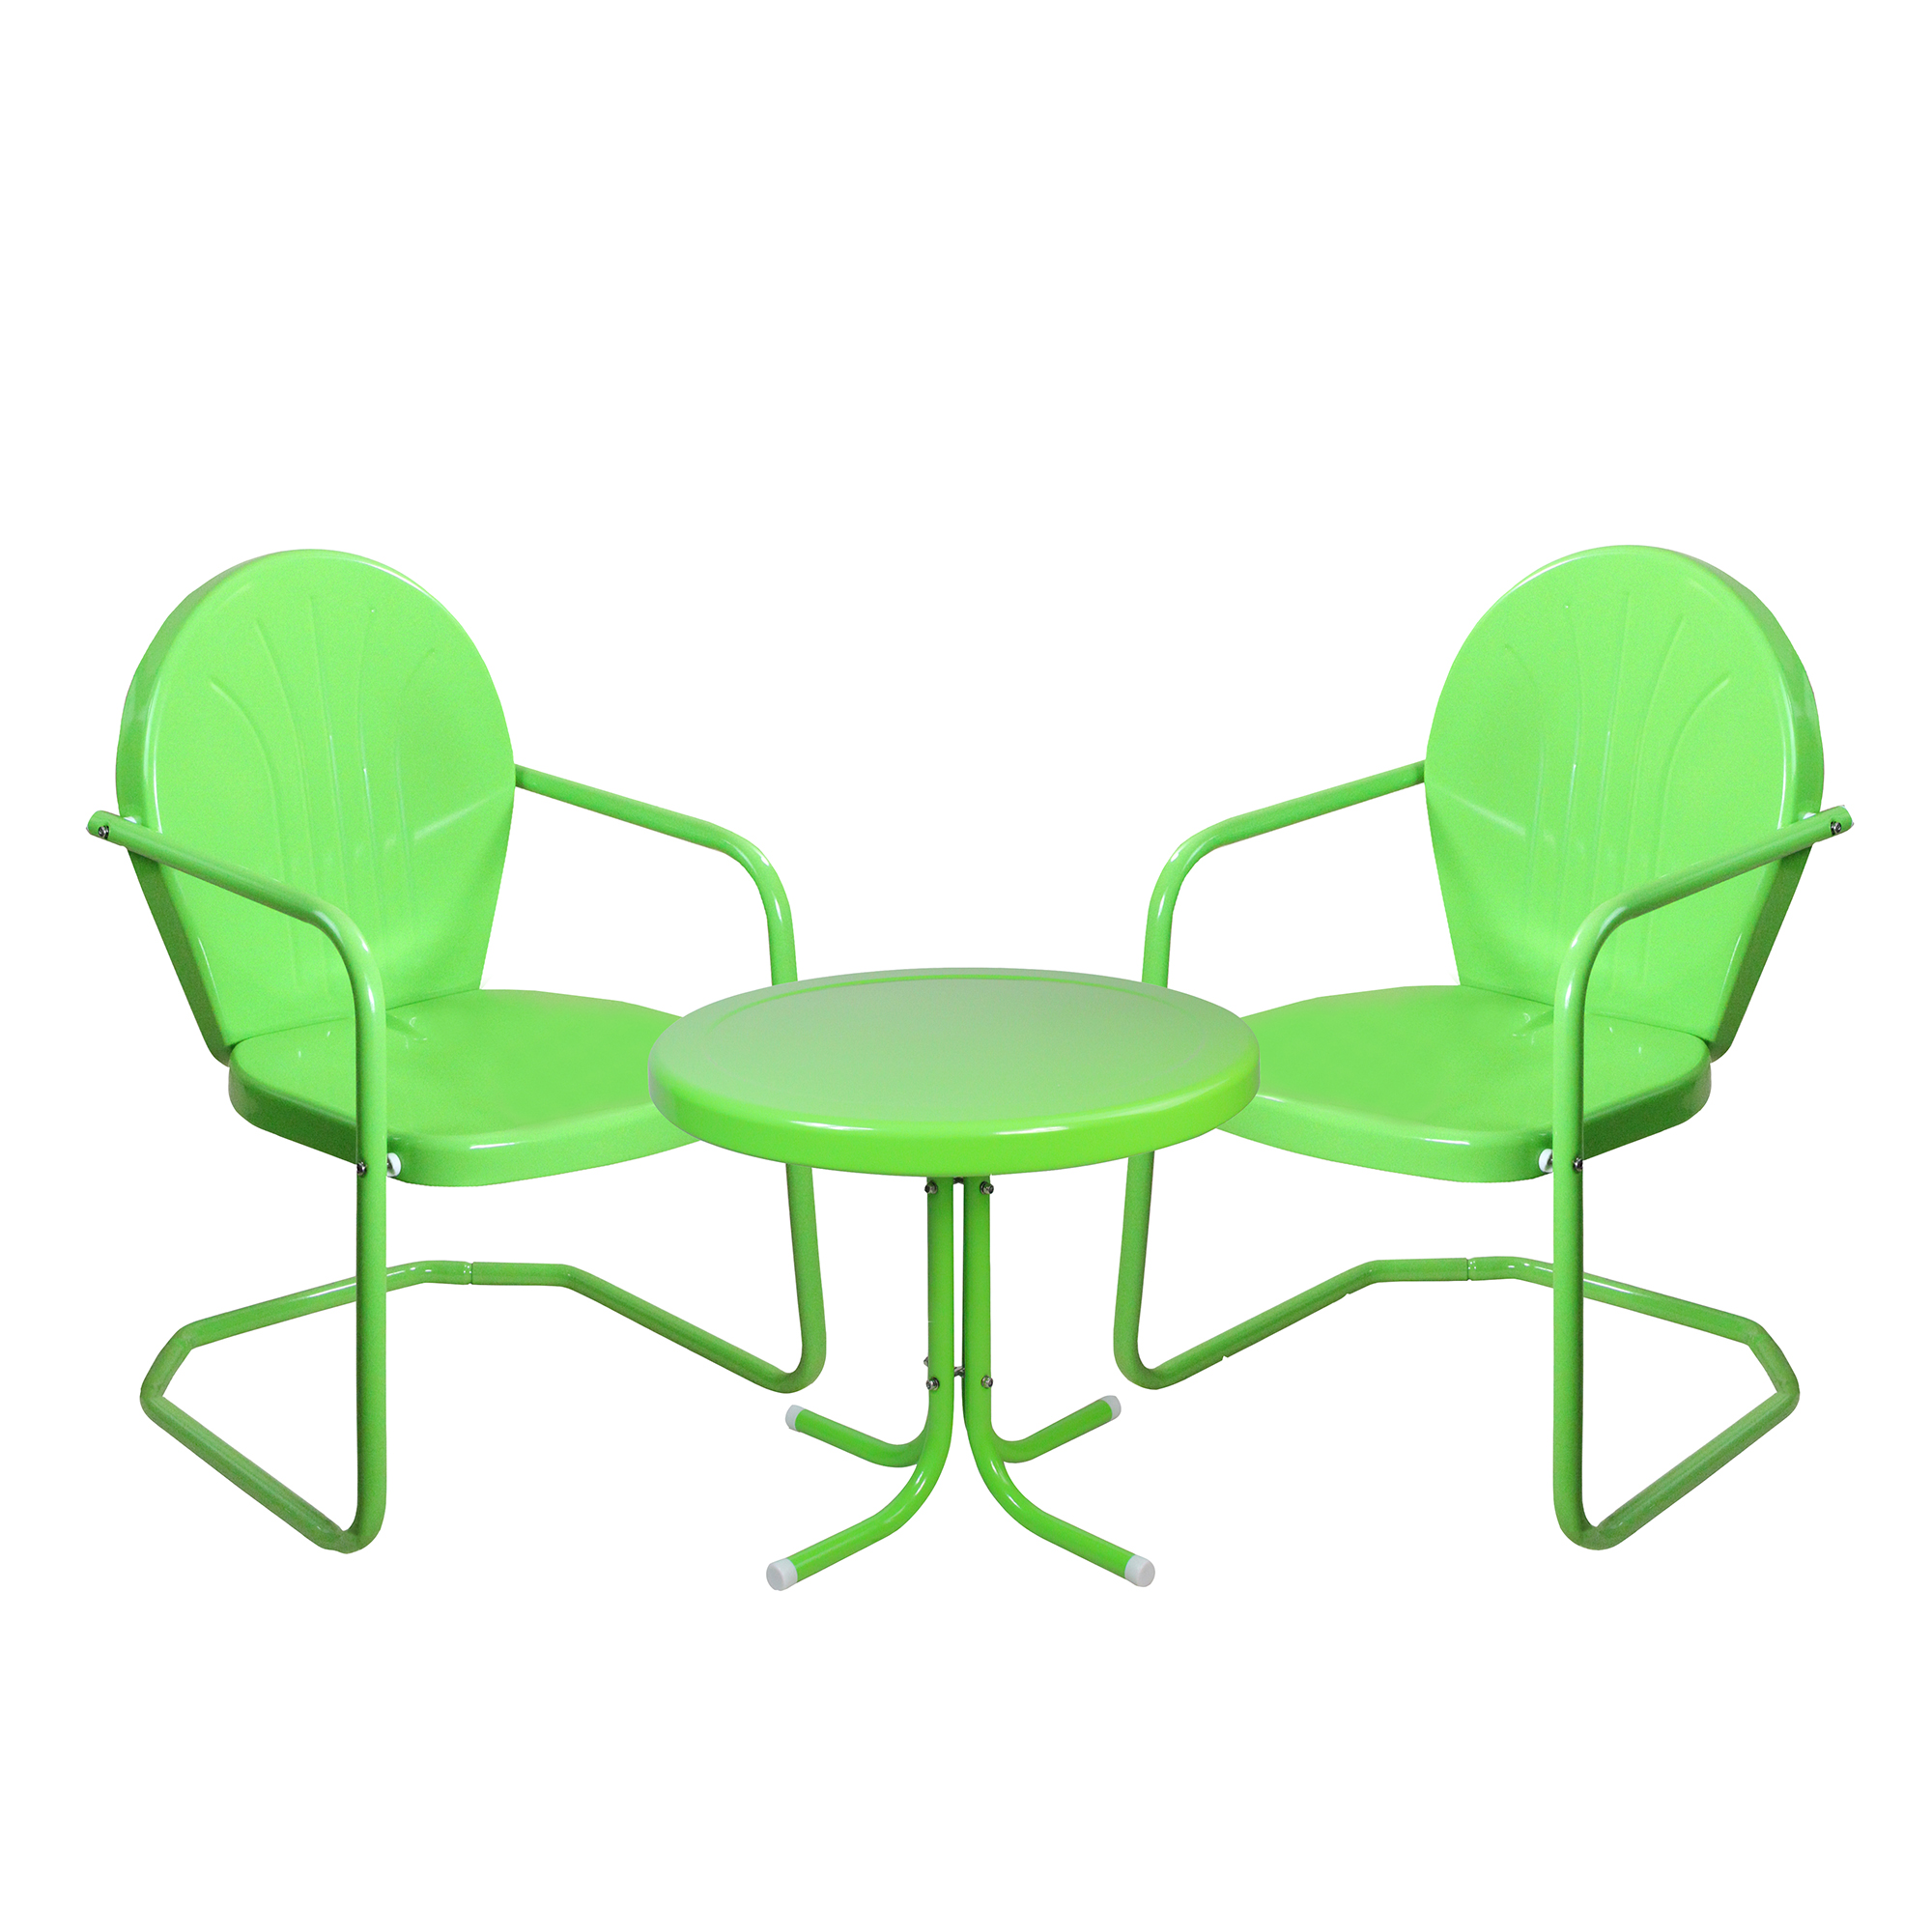 Northlight 3-Piece Retro Metal Tulip Chairs and Side Table Outdoor Set, Lime Green